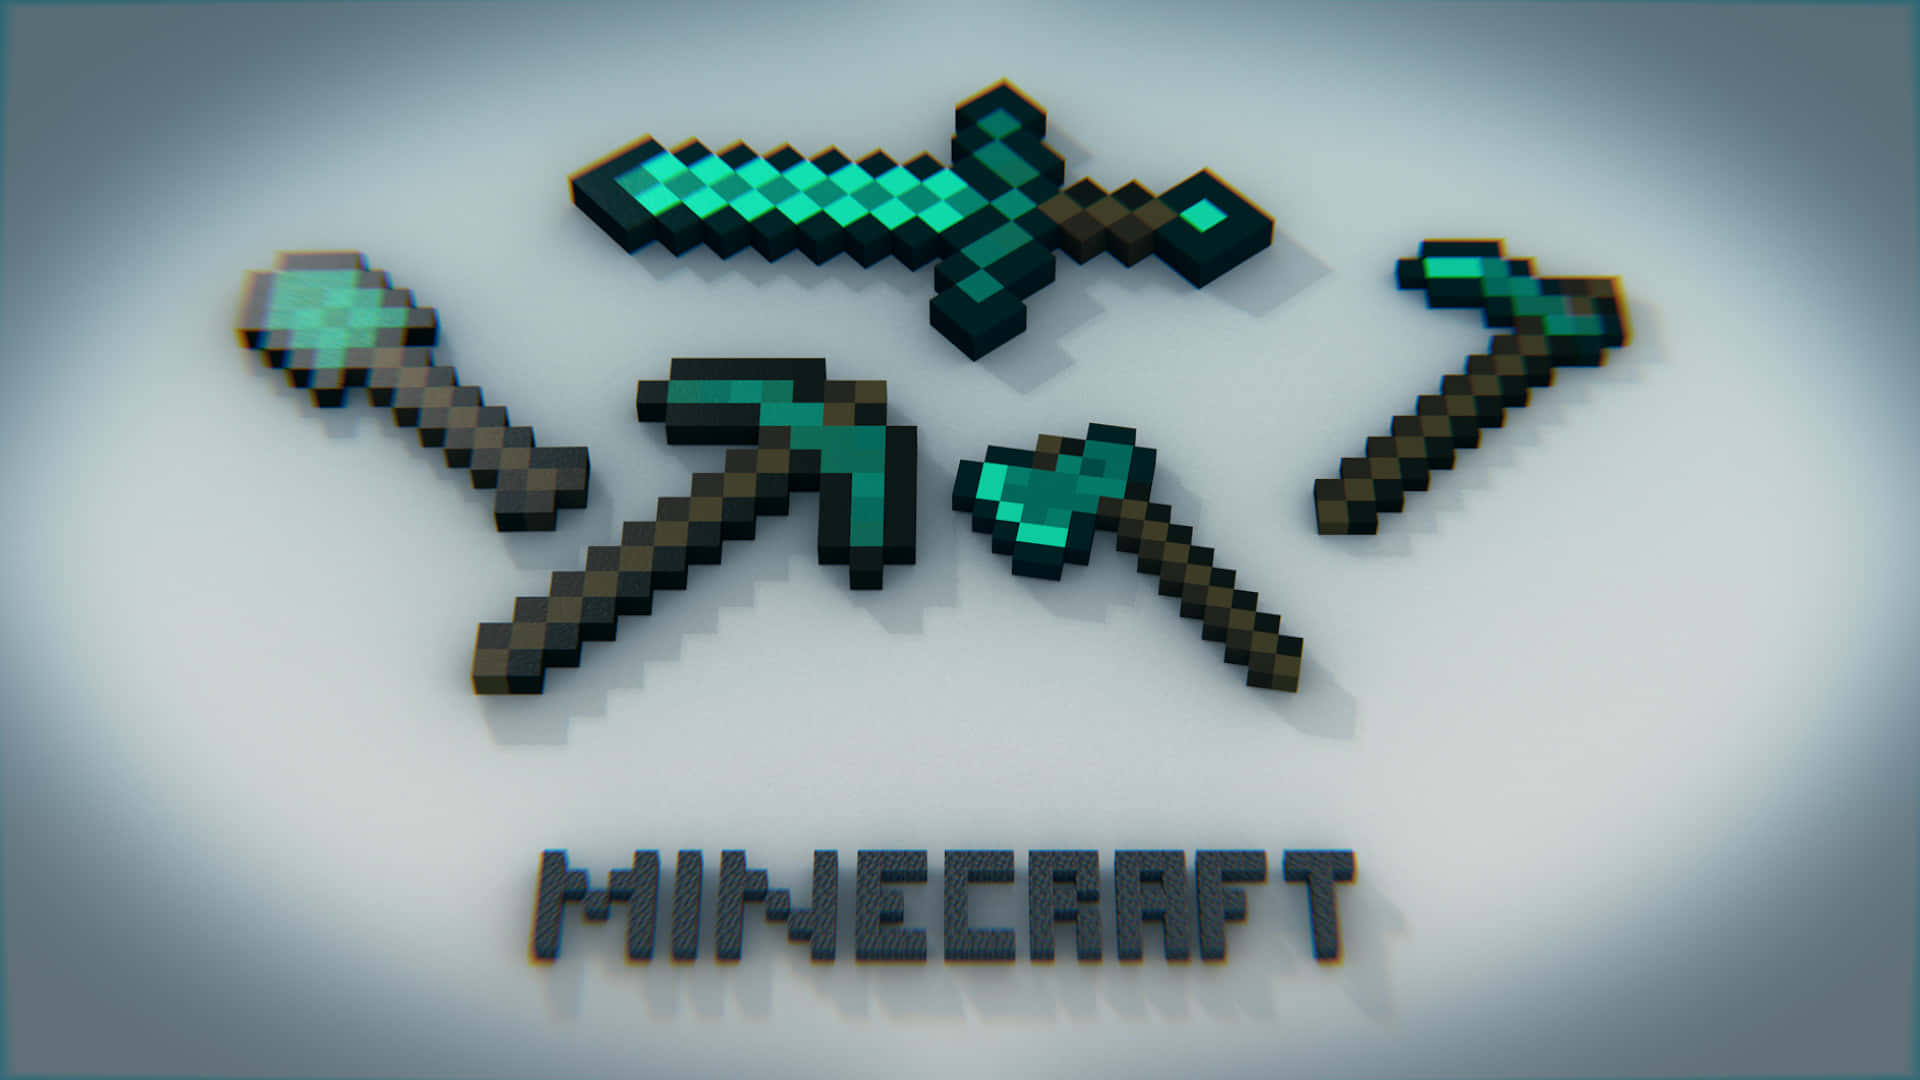 Minecraft Warriors - Ready for Battle with Their Weapons! Wallpaper